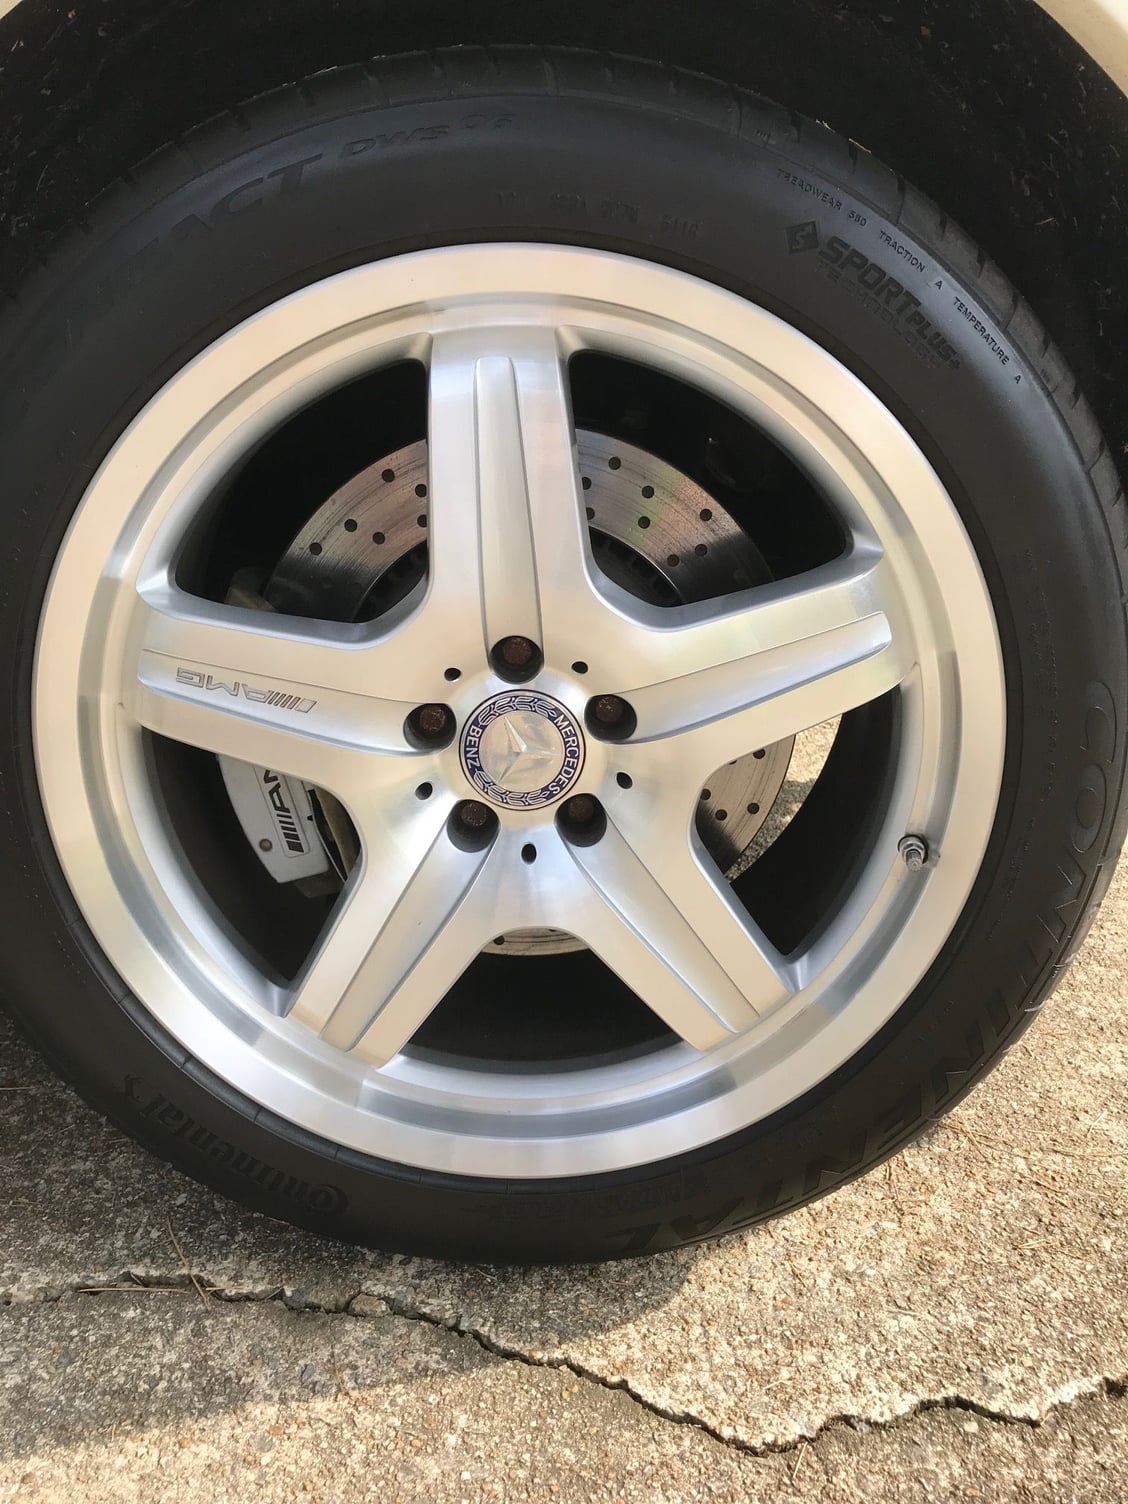 Wheels and Tires/Axles - FS: NC W164 ML63 oem wheels 20x10 in excellent condition - Used - 2007 to 2012 Mercedes-Benz ML63 AMG - Raleigh, NC 27616, United States